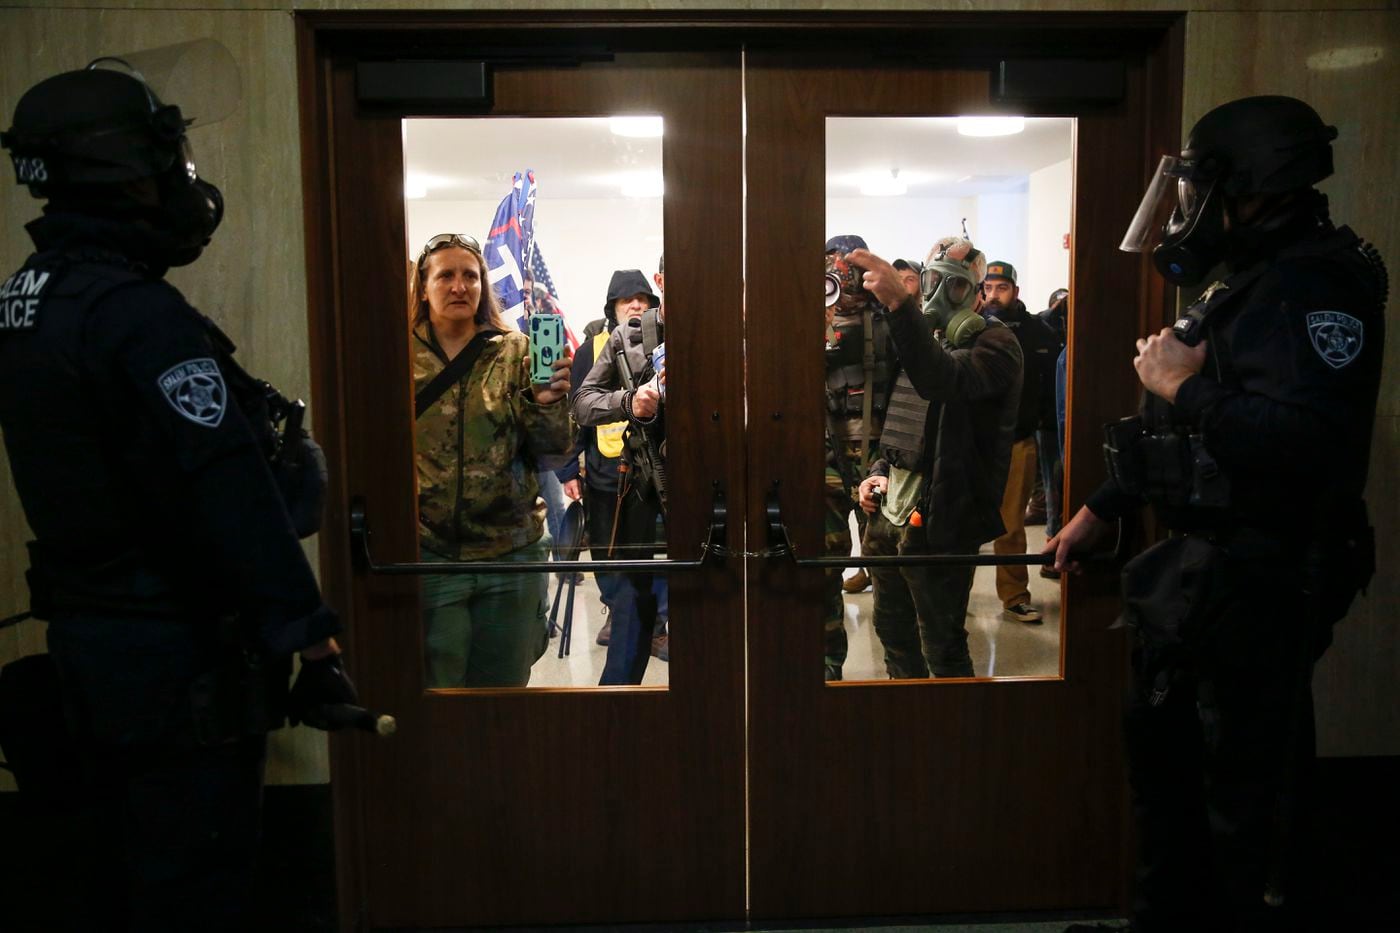 Right-wing protesters try to get into the Oregon State Capitol during a special session on Monday, Dec. 21, 2020 in Salem, Oregon.